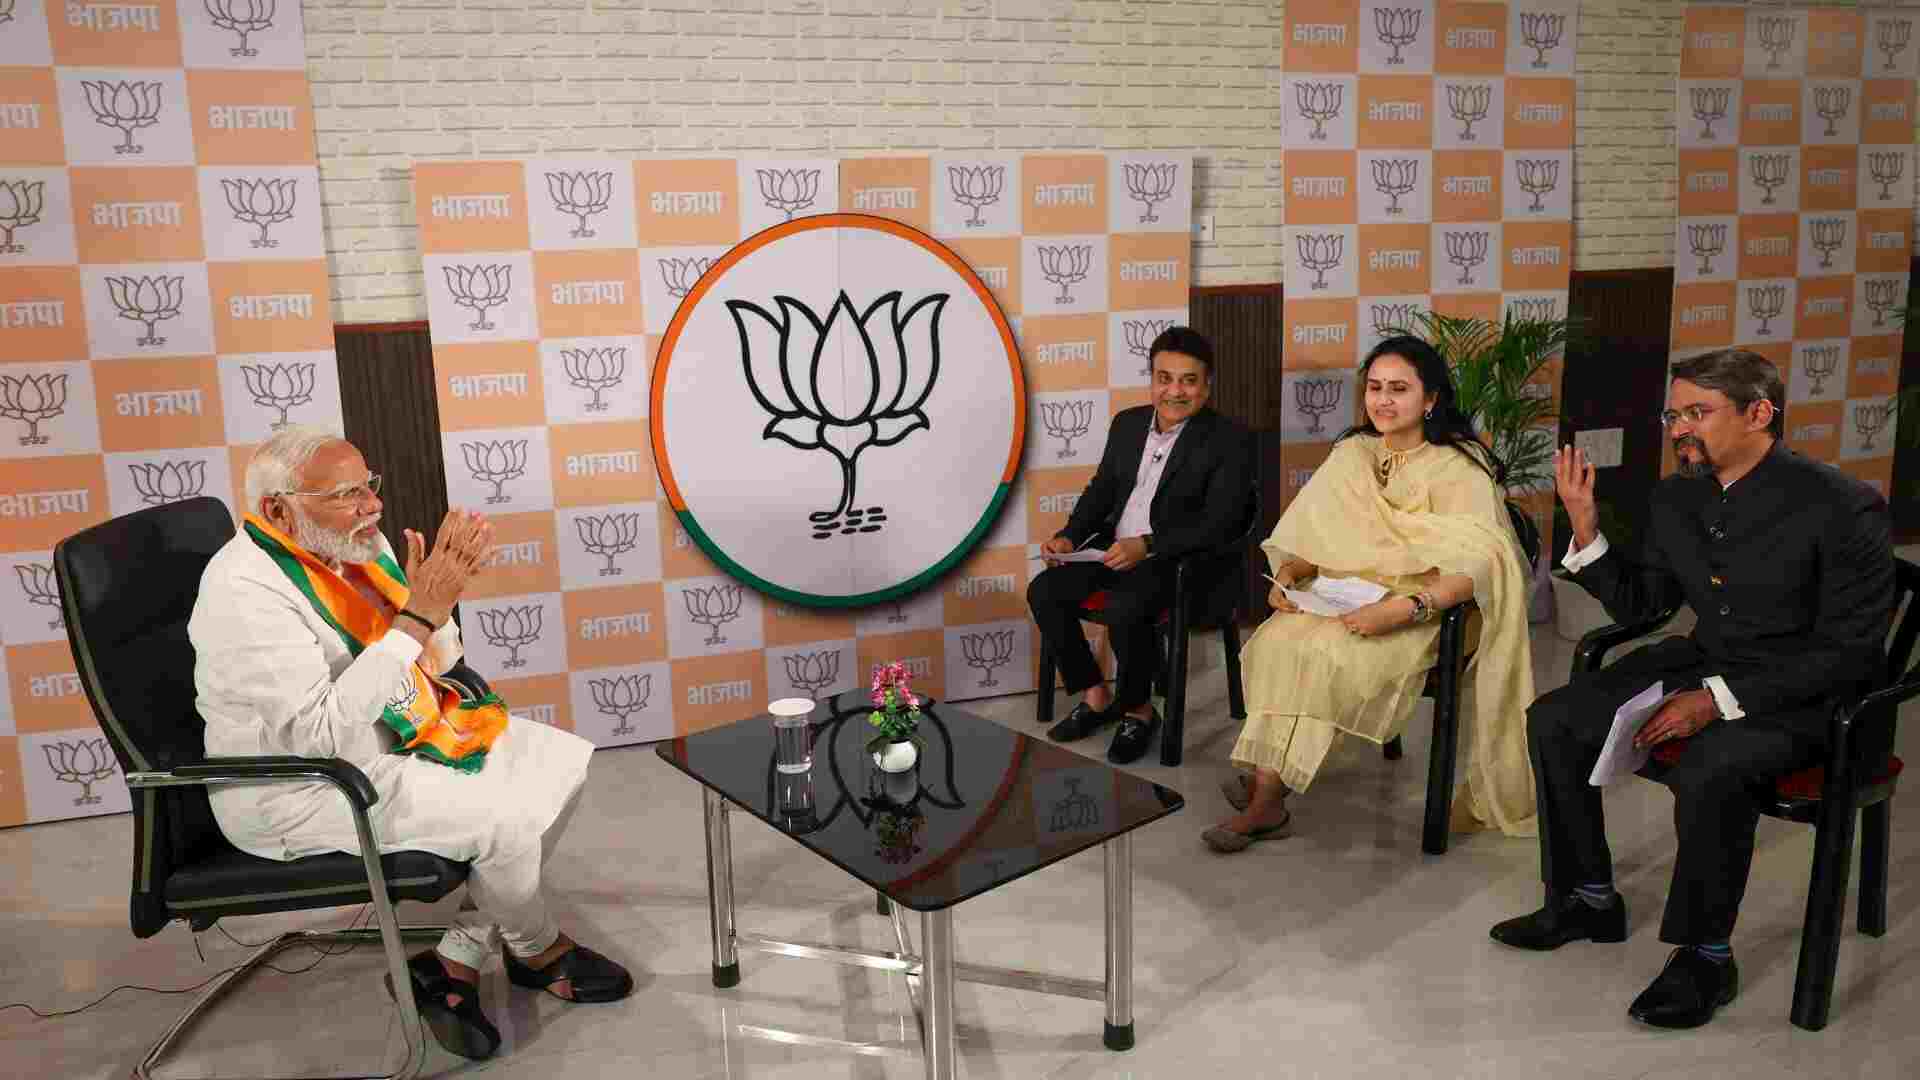 PM Modi Exclusive Interview: My Priority Was To Ensure That Every Poor Household Has A lit Stove